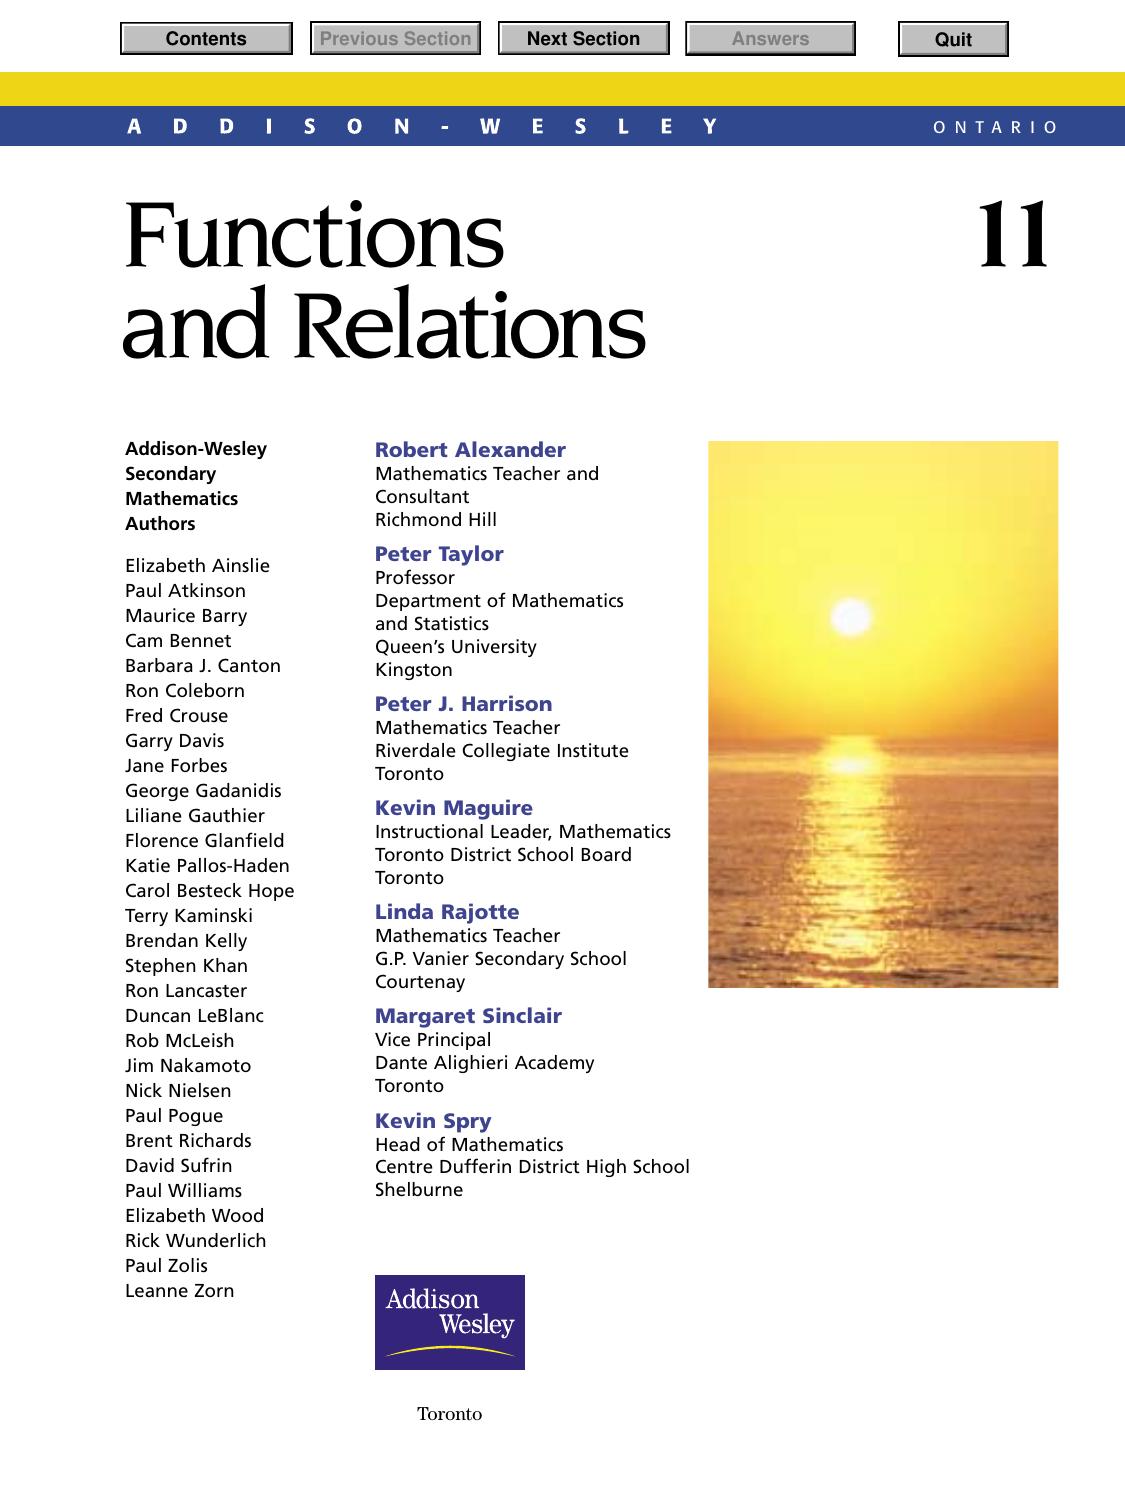 Functions and Relations 11 by Robert Alexander